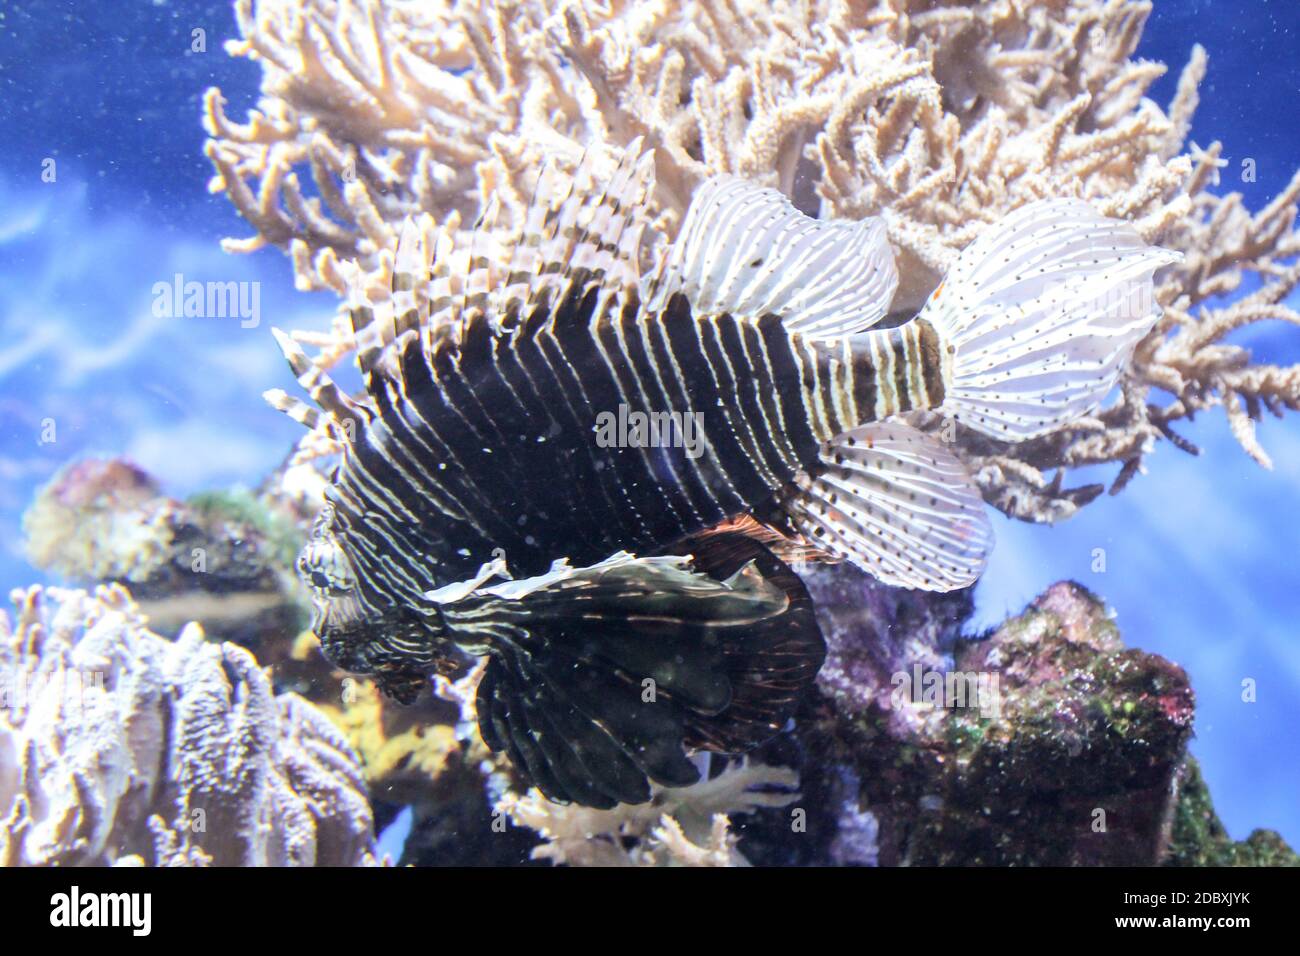 A dangerous lionfish on a reef. Stock Photo